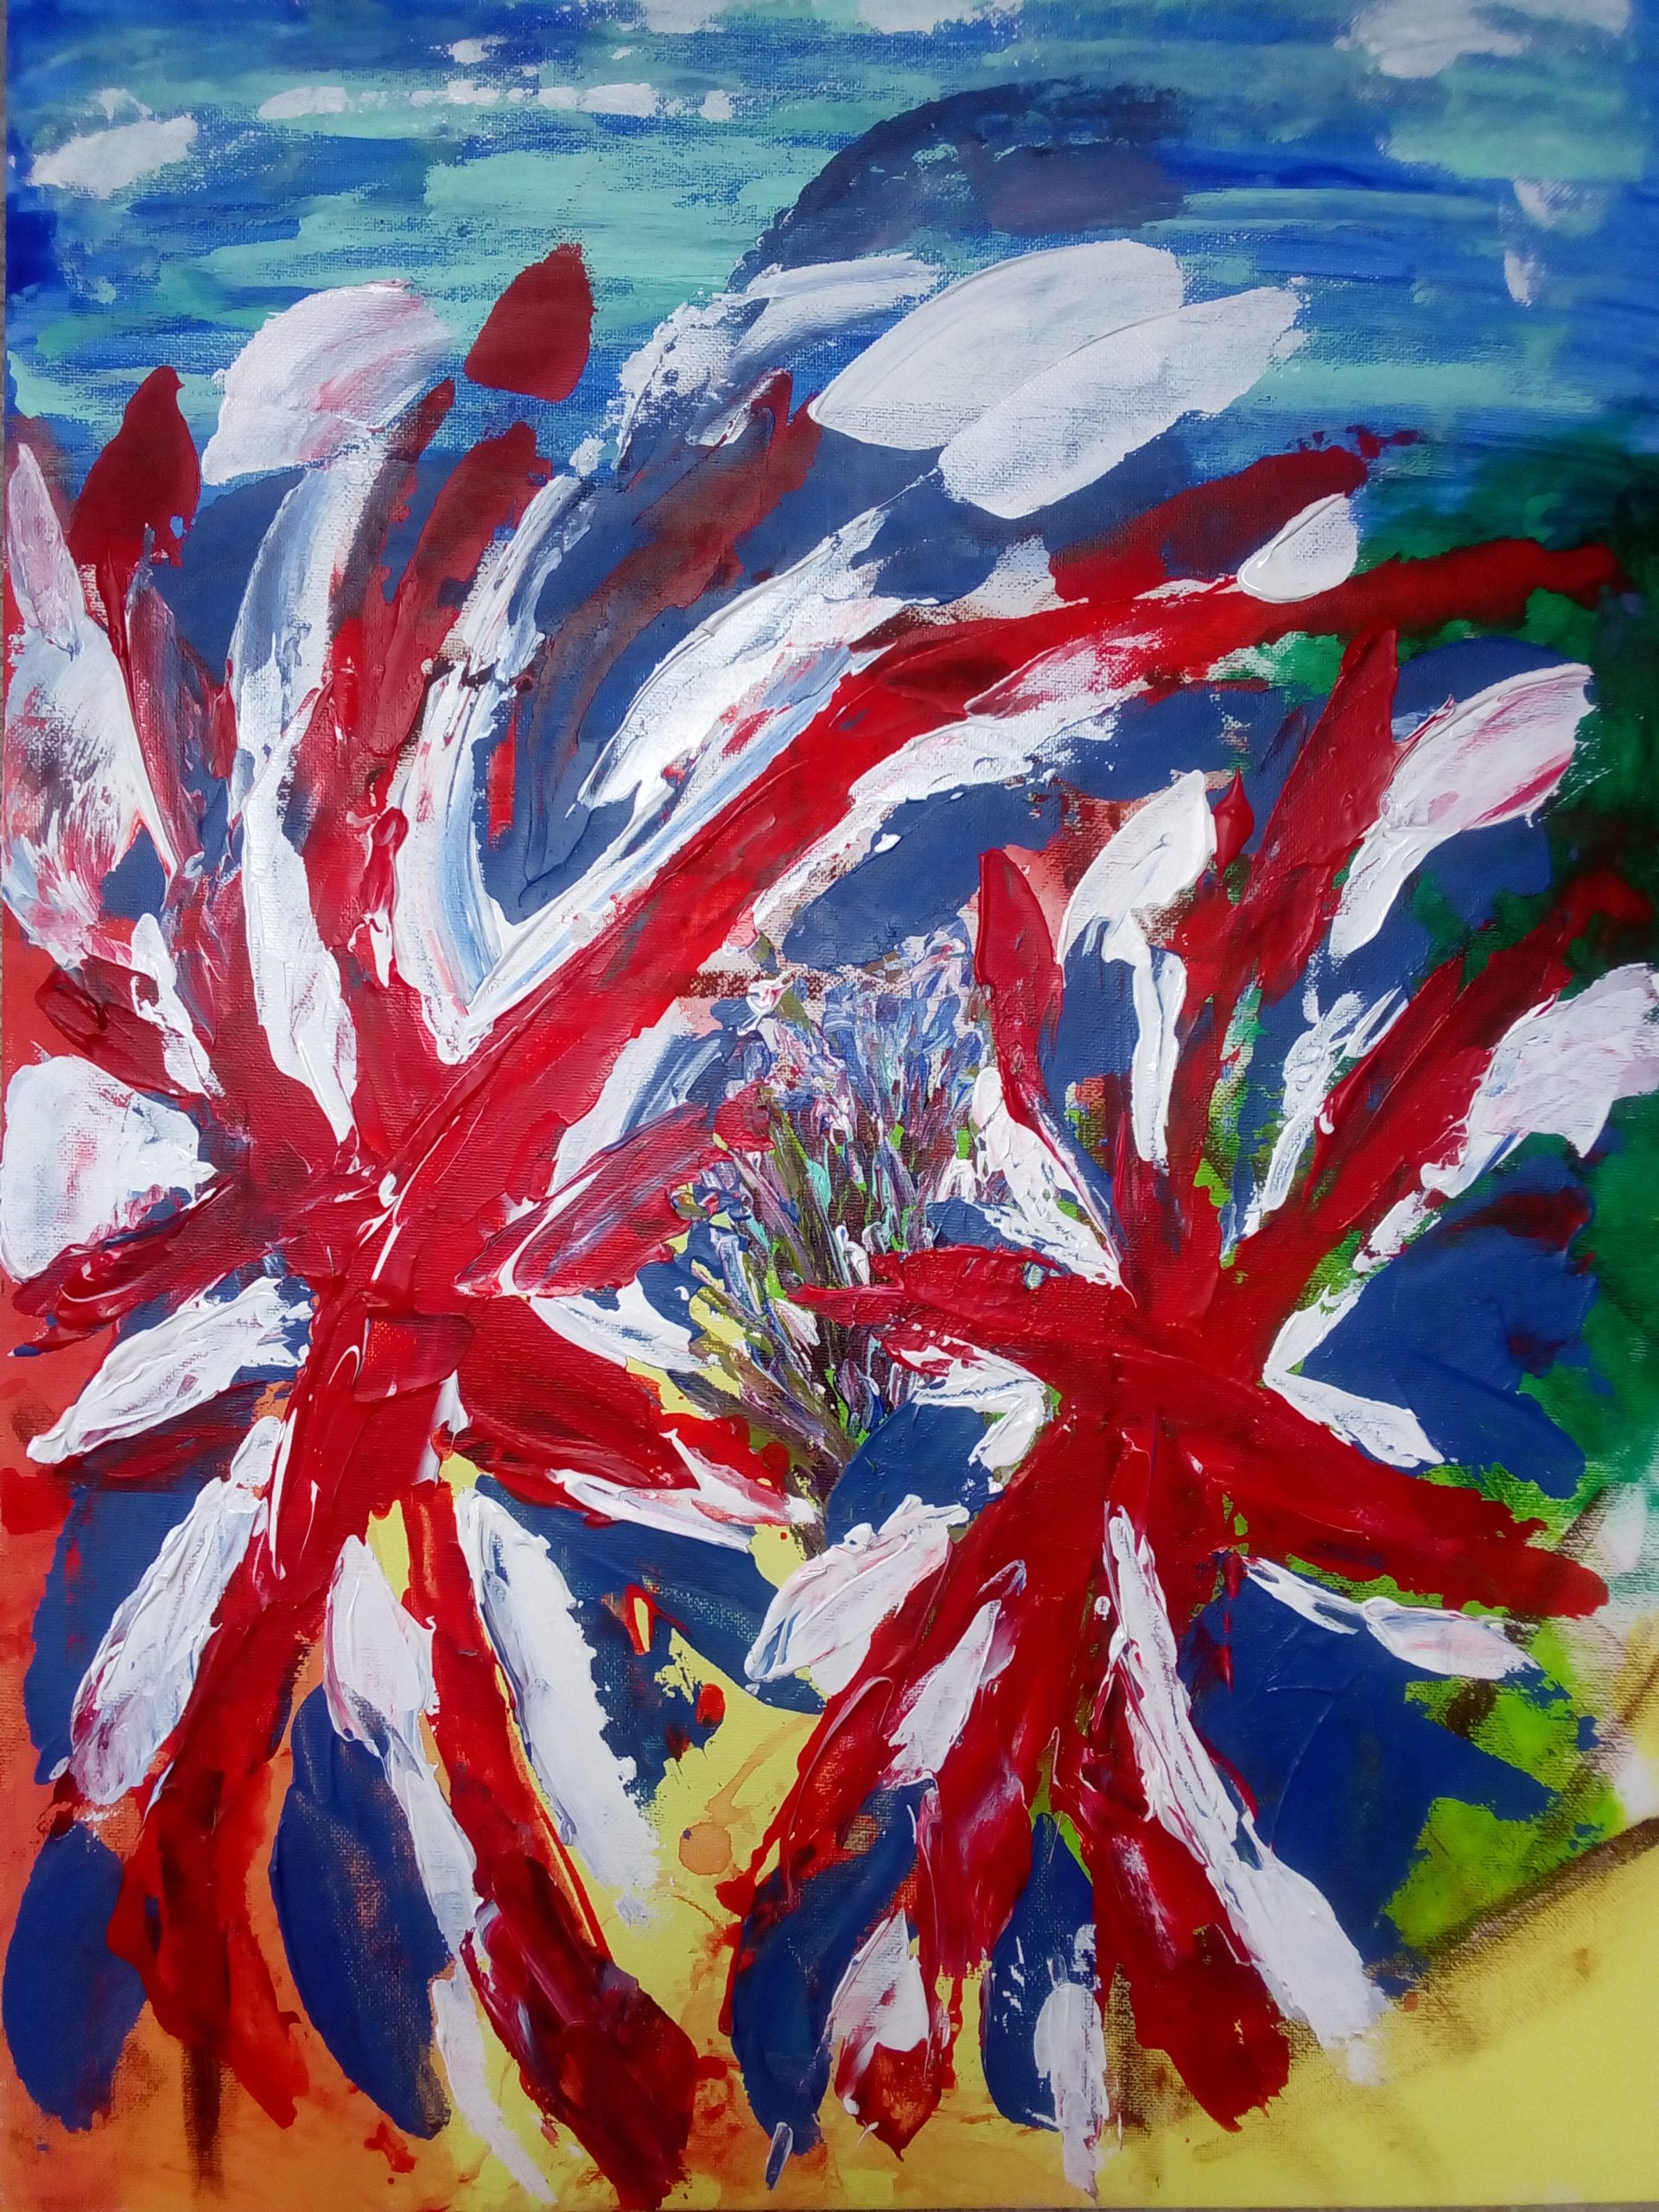 A painting of VE Day flags by Patrick